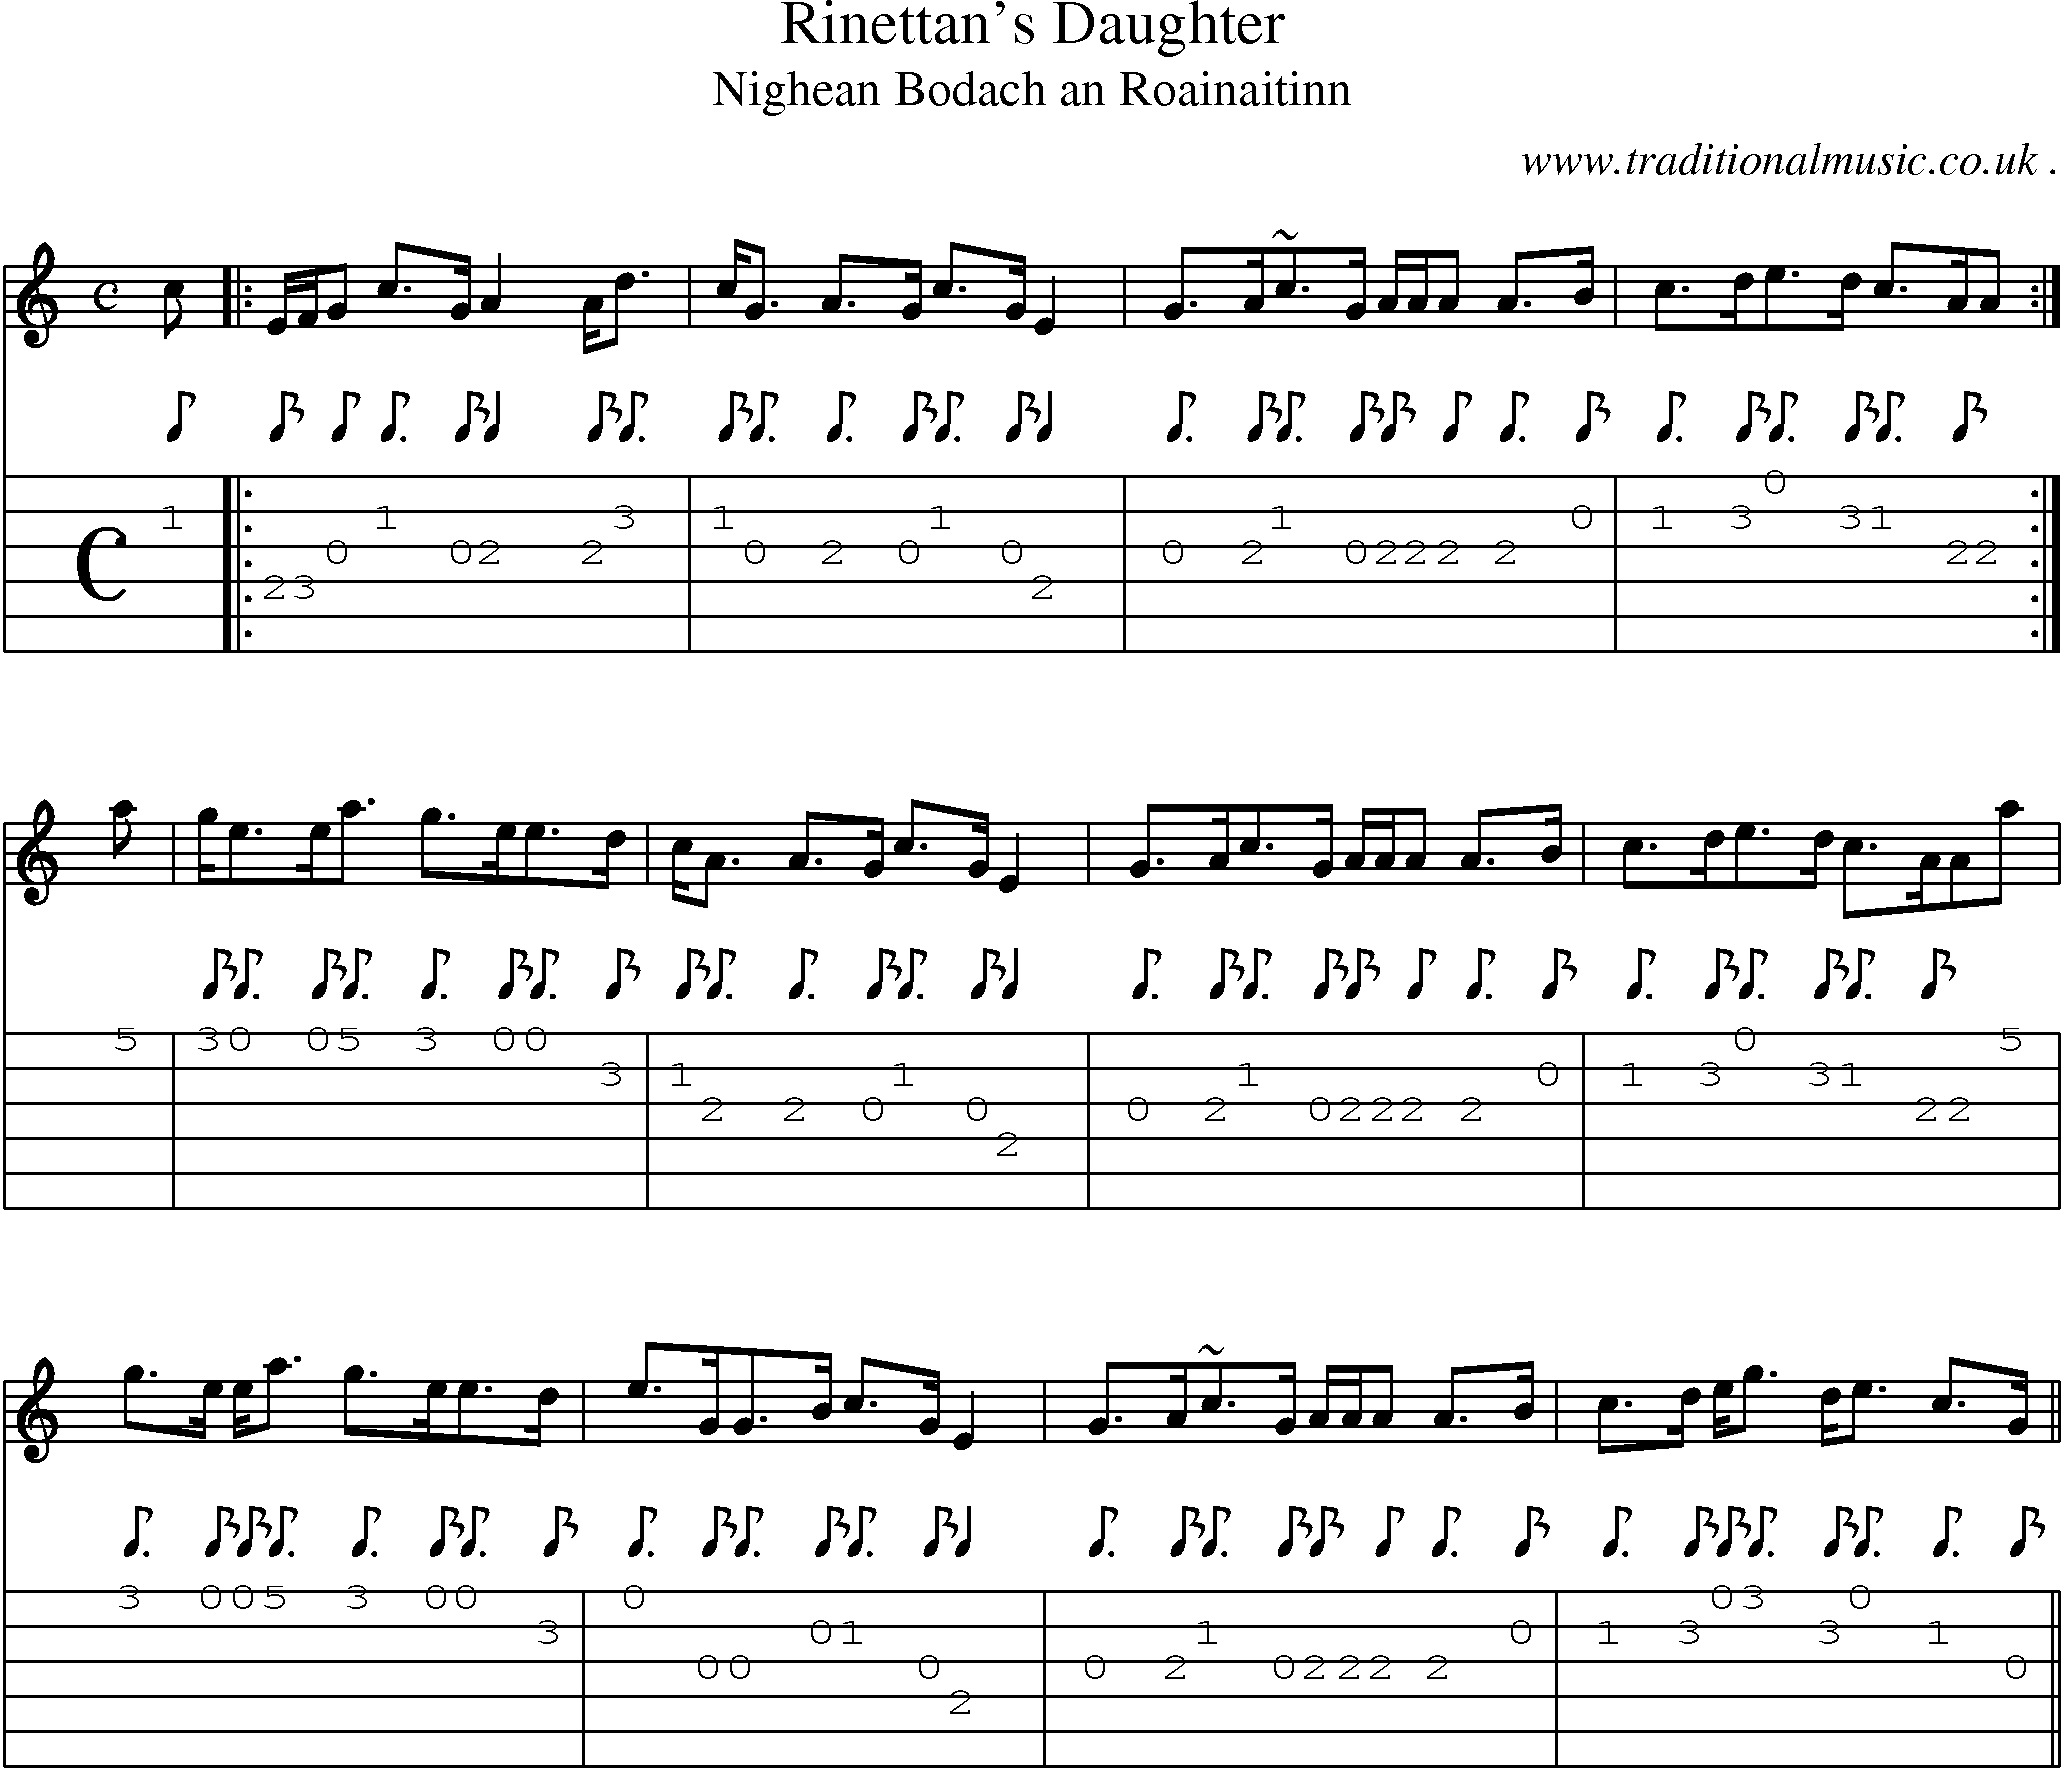 Sheet-music  score, Chords and Guitar Tabs for Rinettans Daughter